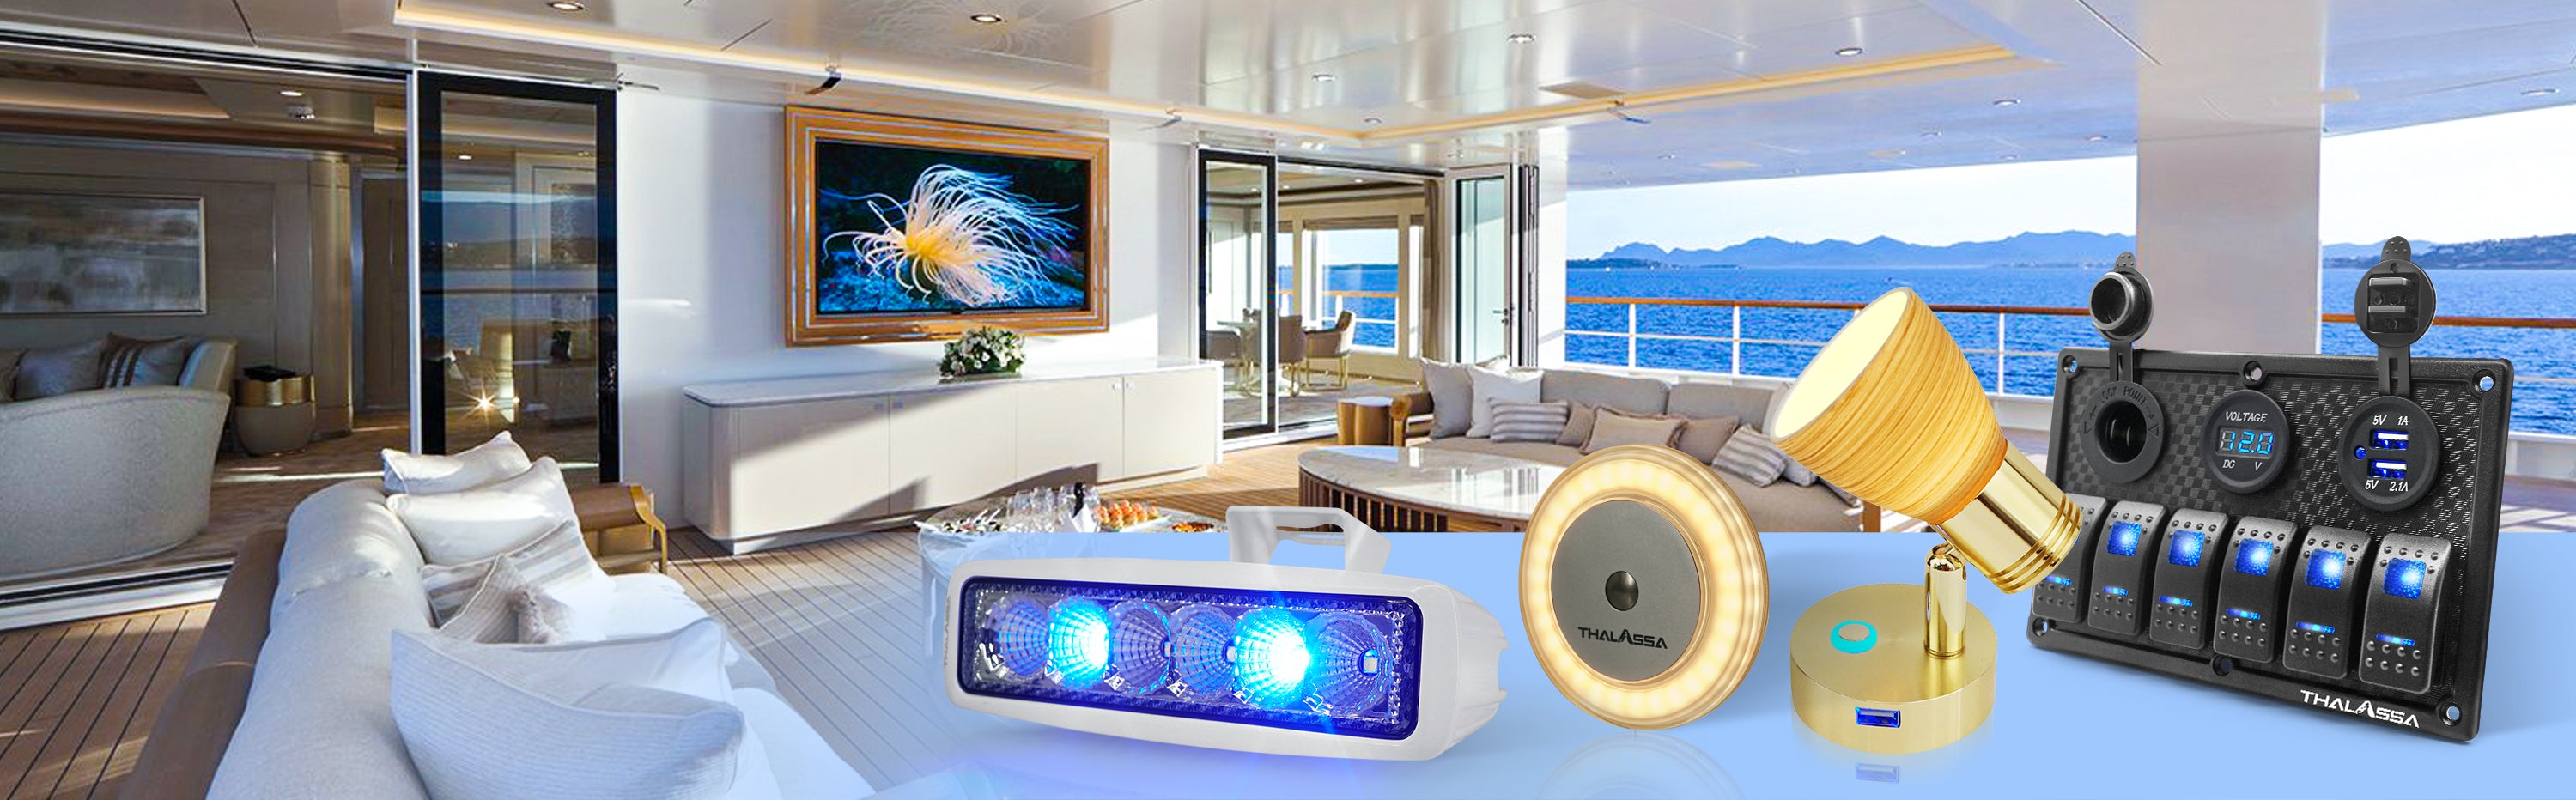 One Stop Shop for Boat RV Accessories-deck light,ceiling lights,reading lights,switch panel for boat yacht rv caranvan